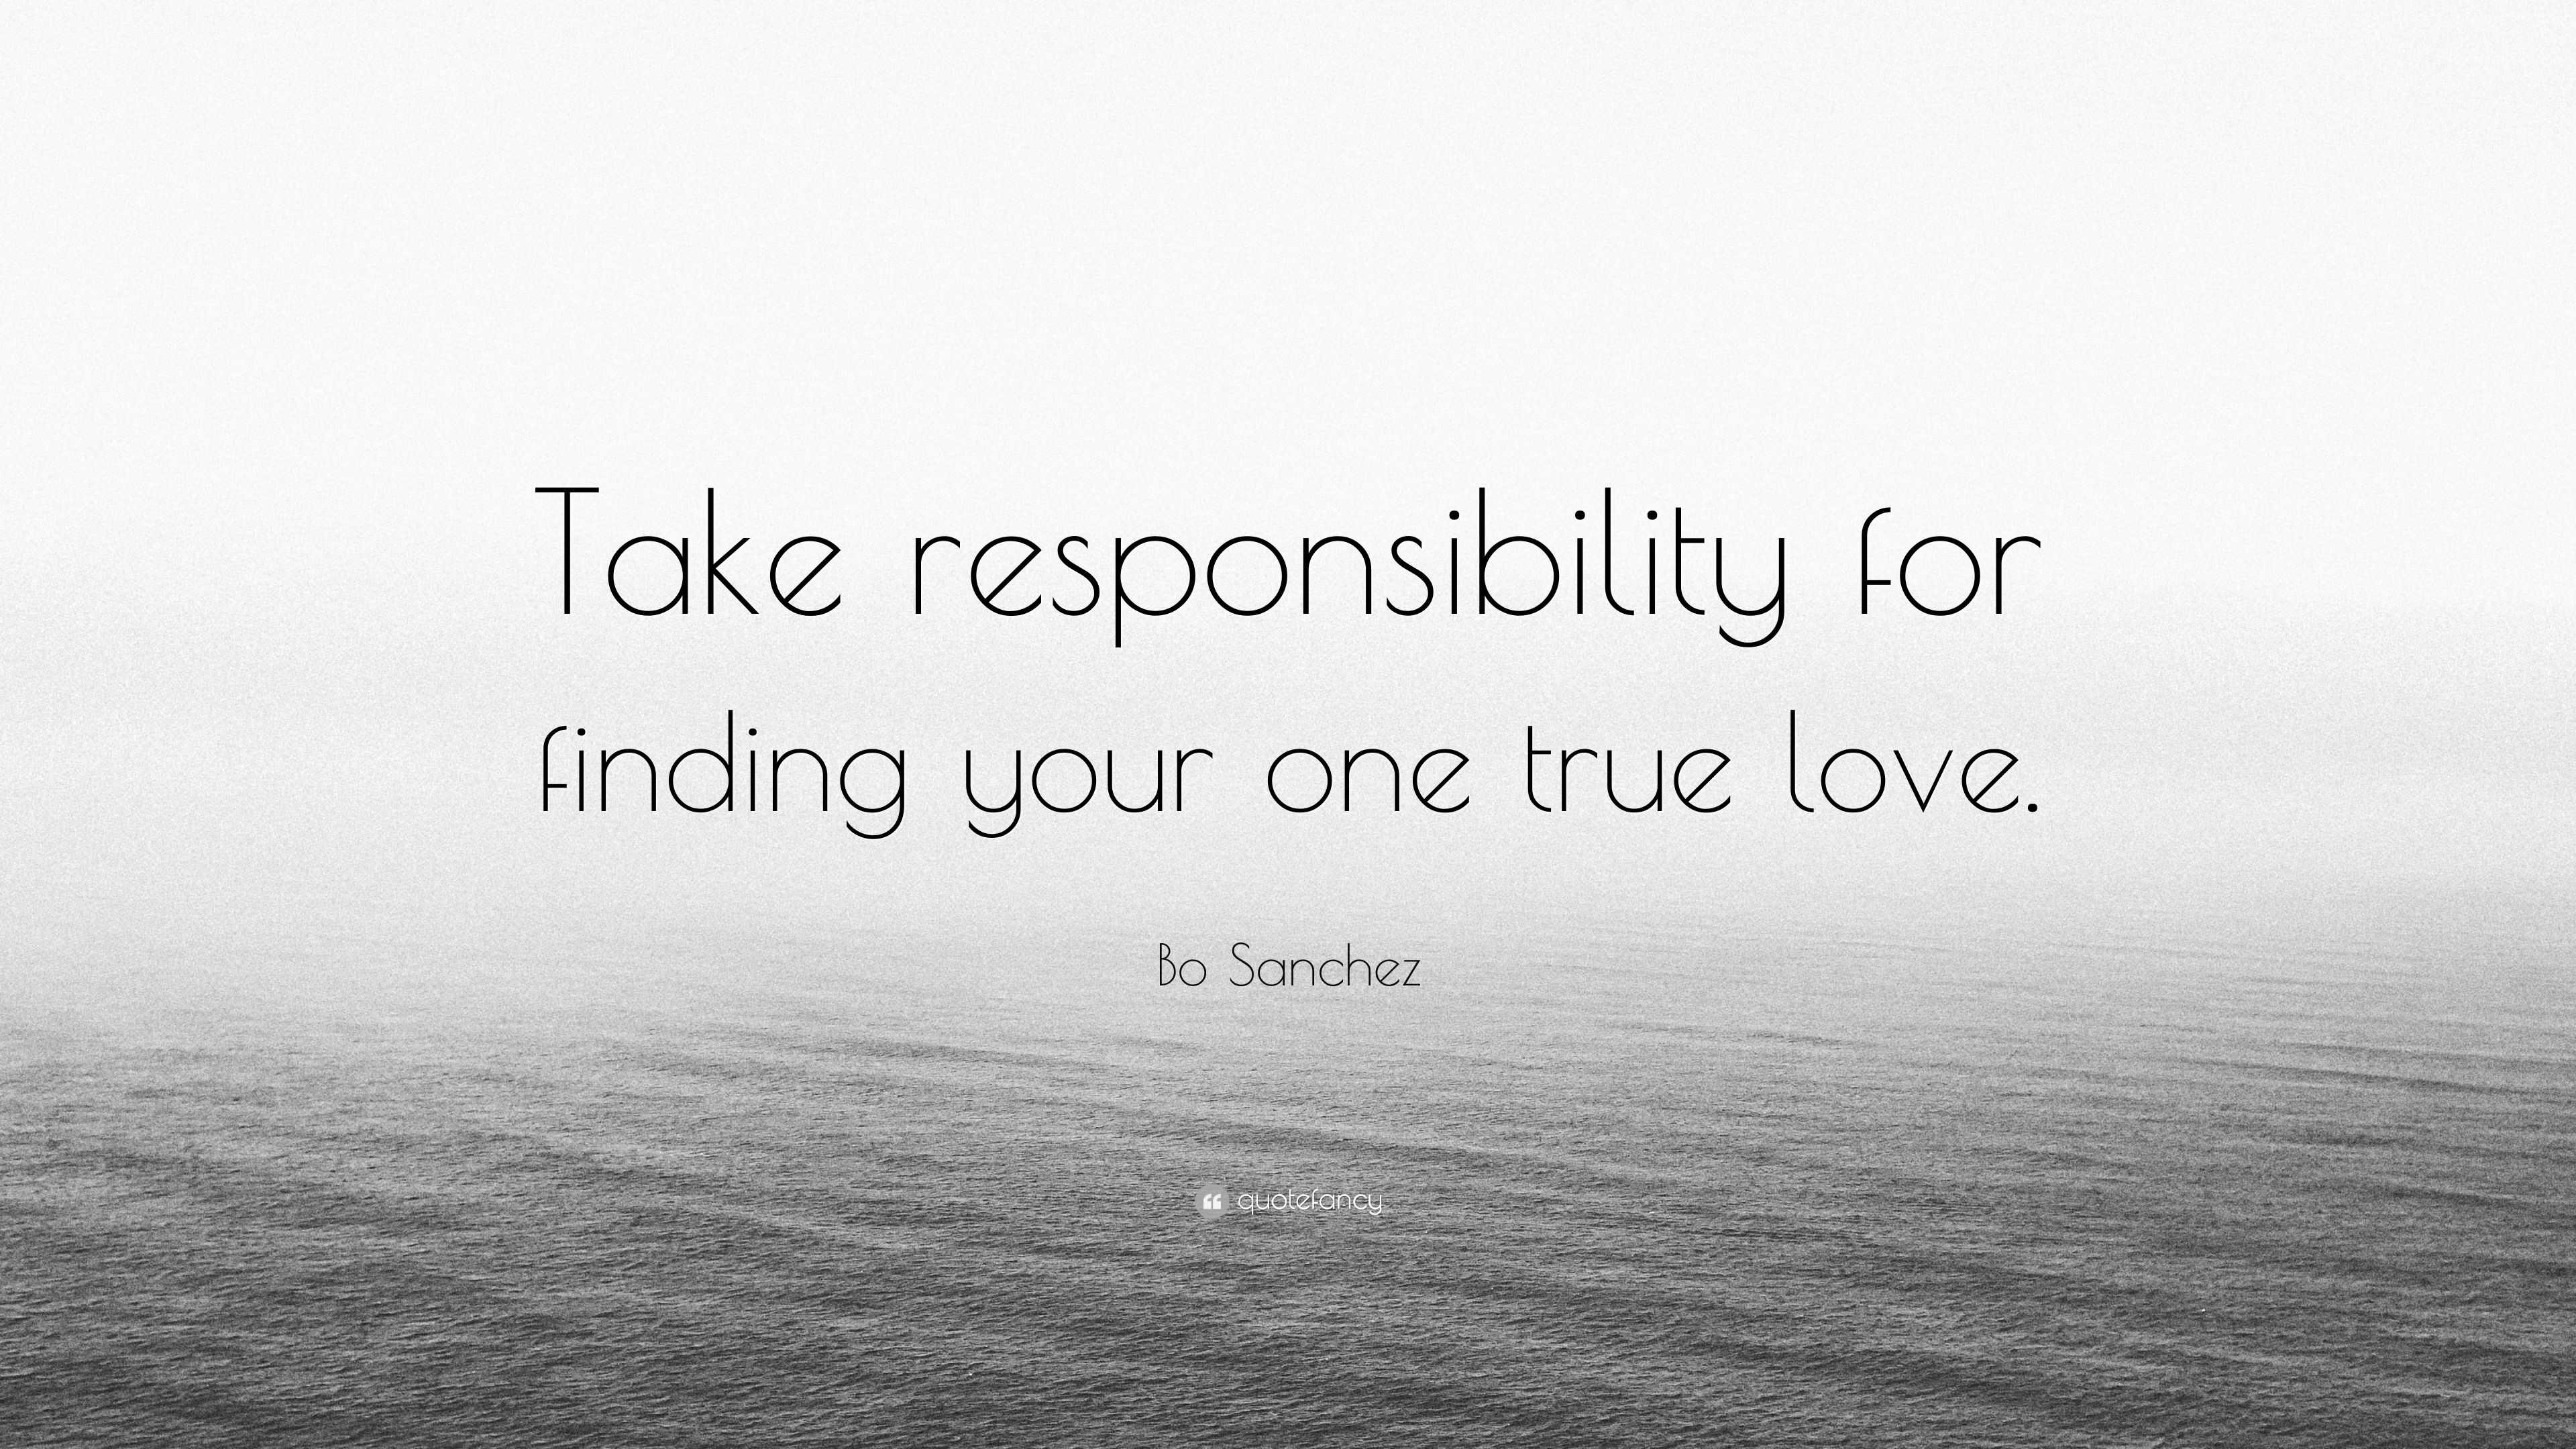 Bo Sanchez Quote “Take responsibility for finding your one true love ”